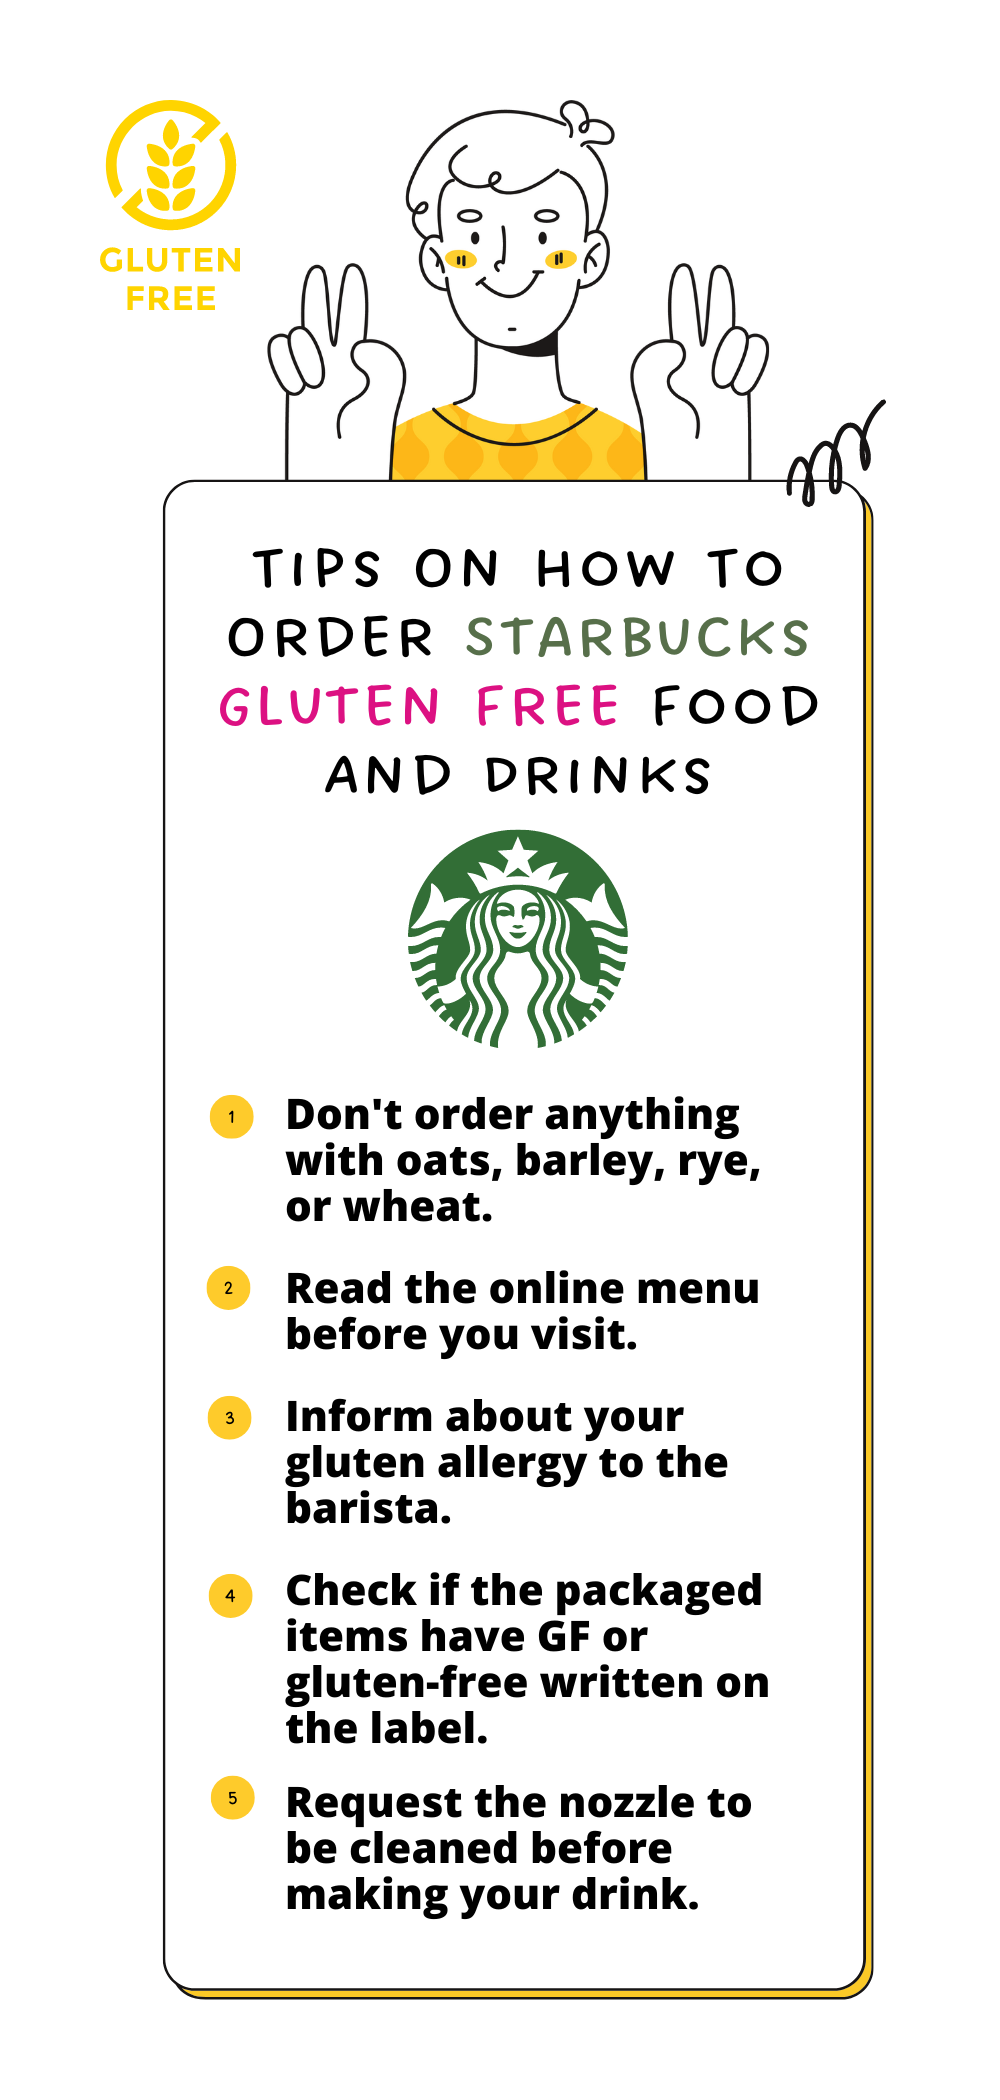 Tips On How To Order Starbucks Gluten Free Food And Drinks